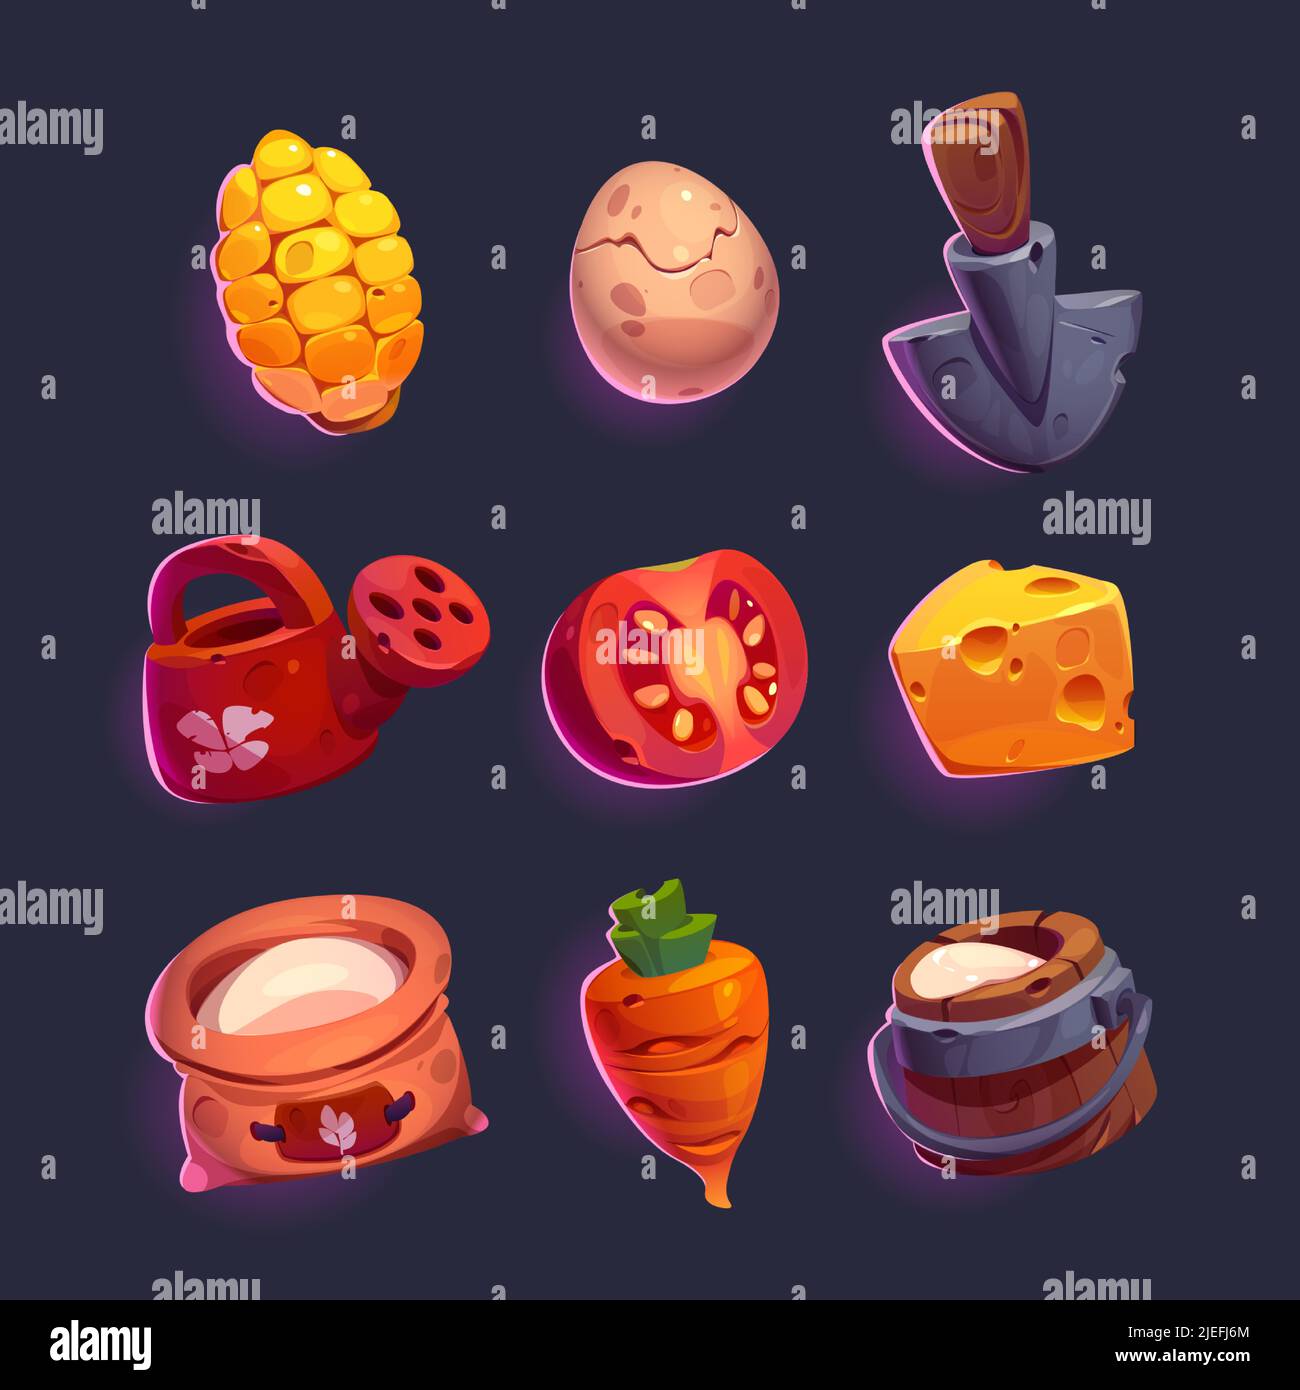 https://c8.alamy.com/comp/2JEFJ6M/set-of-game-icons-gardening-and-farm-cartoon-elements-vector-wooden-milk-bucket-watering-can-egg-and-shovel-corn-cob-and-tomato-cheese-and-carrot-canvas-bag-with-flour-2JEFJ6M.jpg